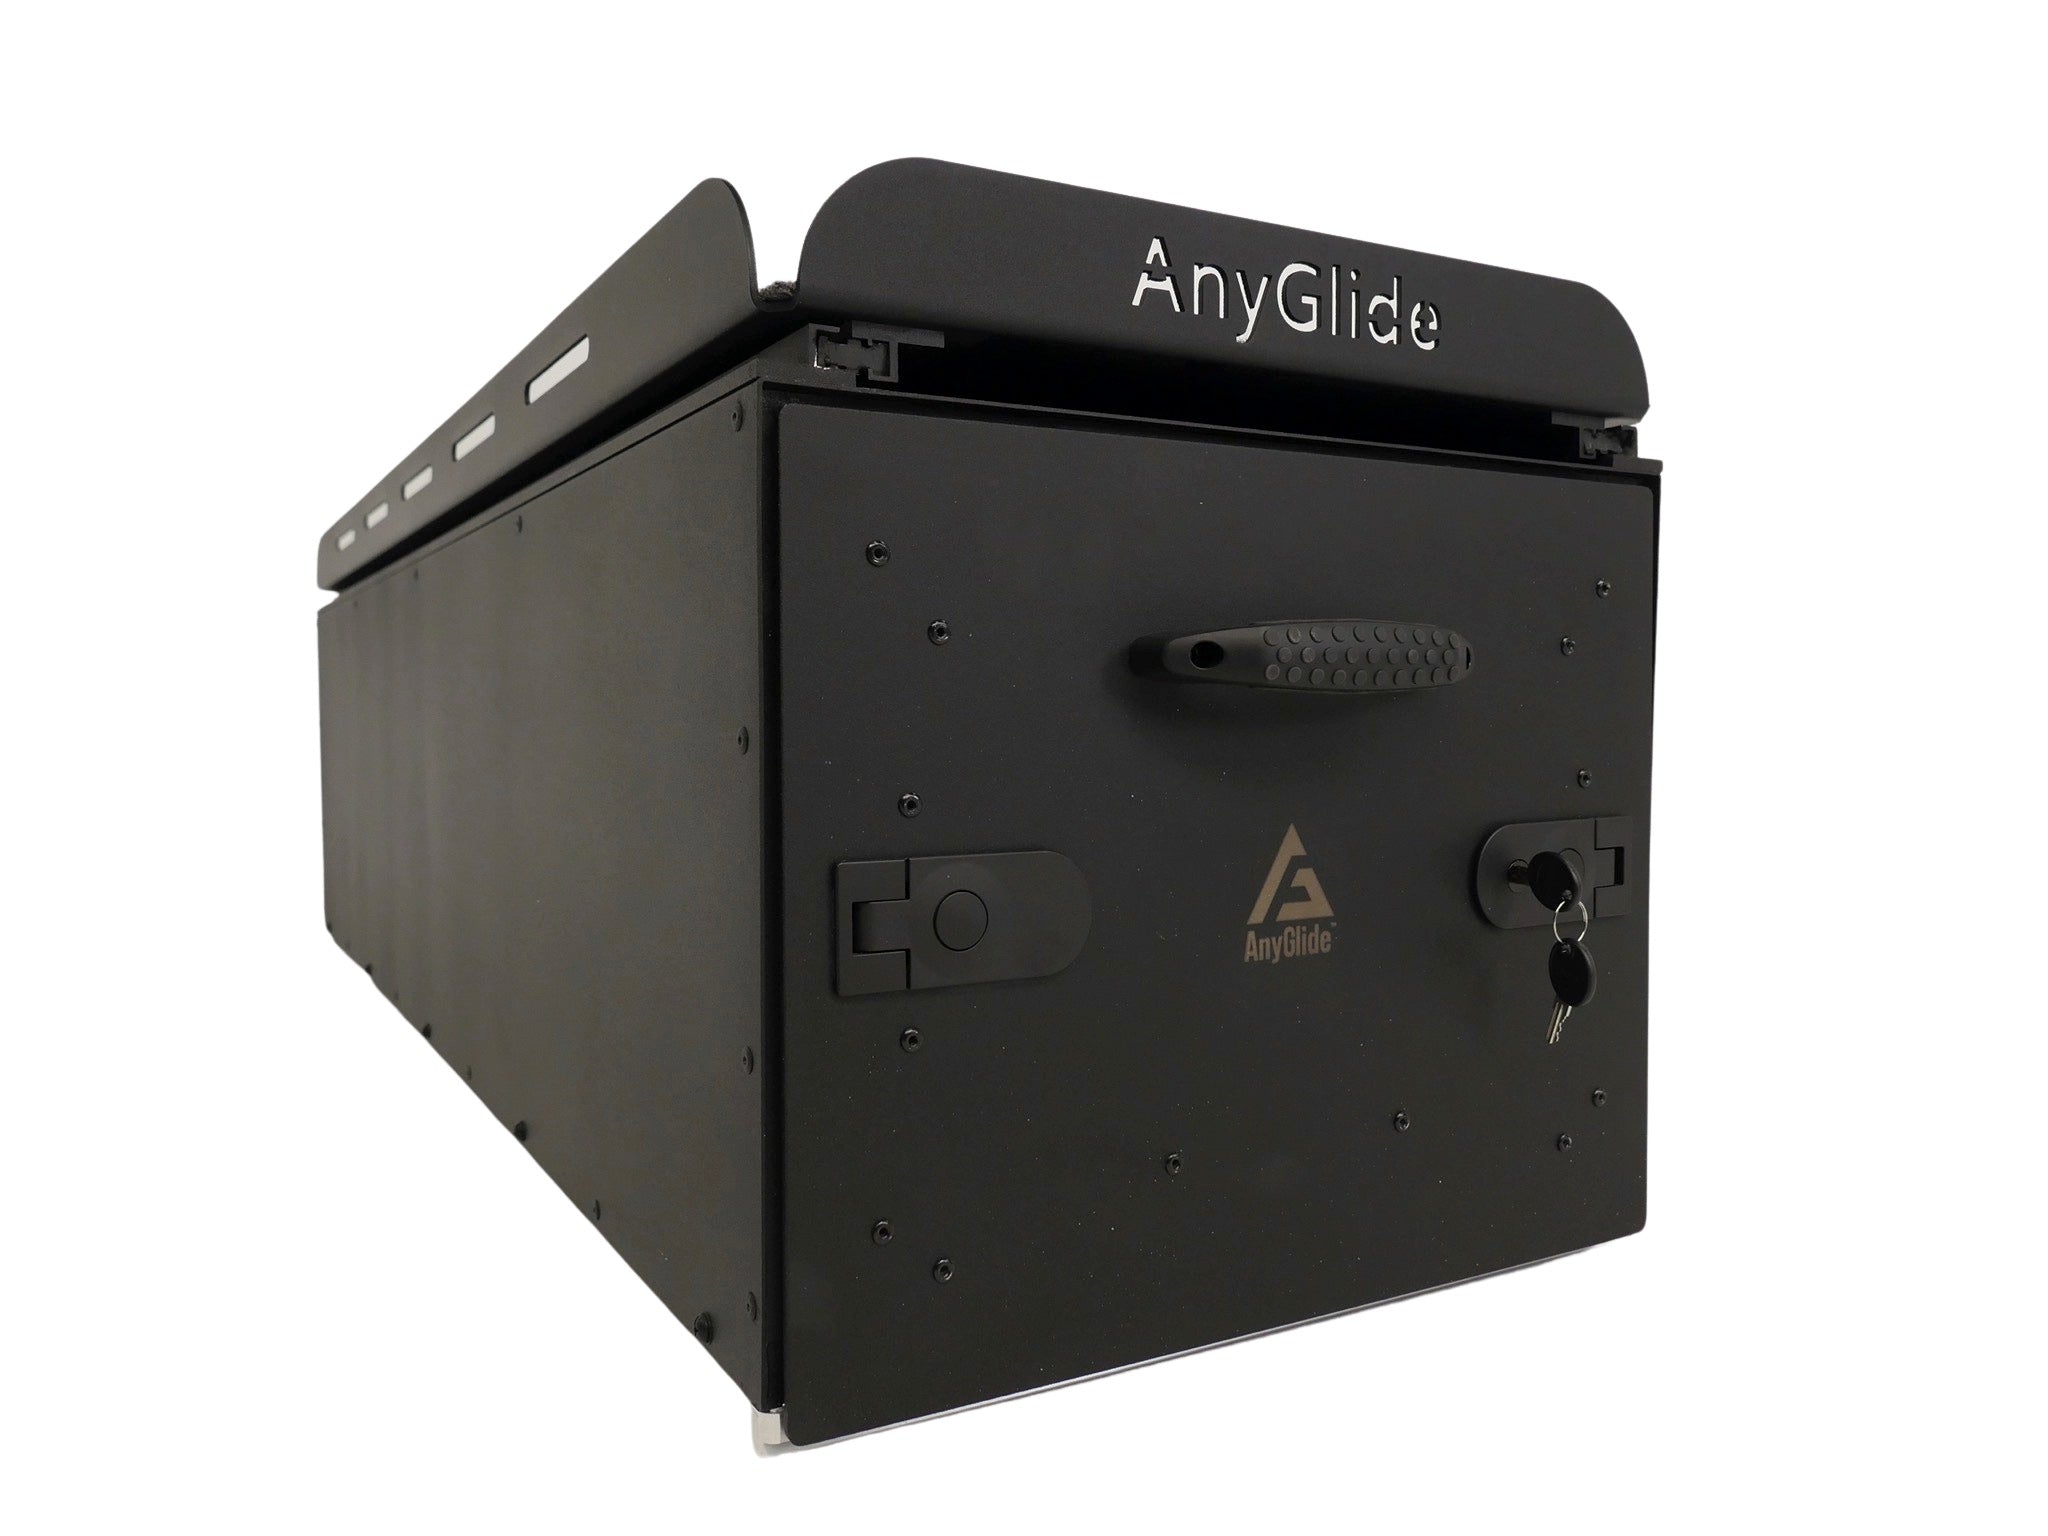 The AnyGlide Truck Bed Storage Solution with Cargo Glide. The most storage for the back of your truck at the best prices. Lockable, dust, and weather resistant. Only uses a third of your truck bed.